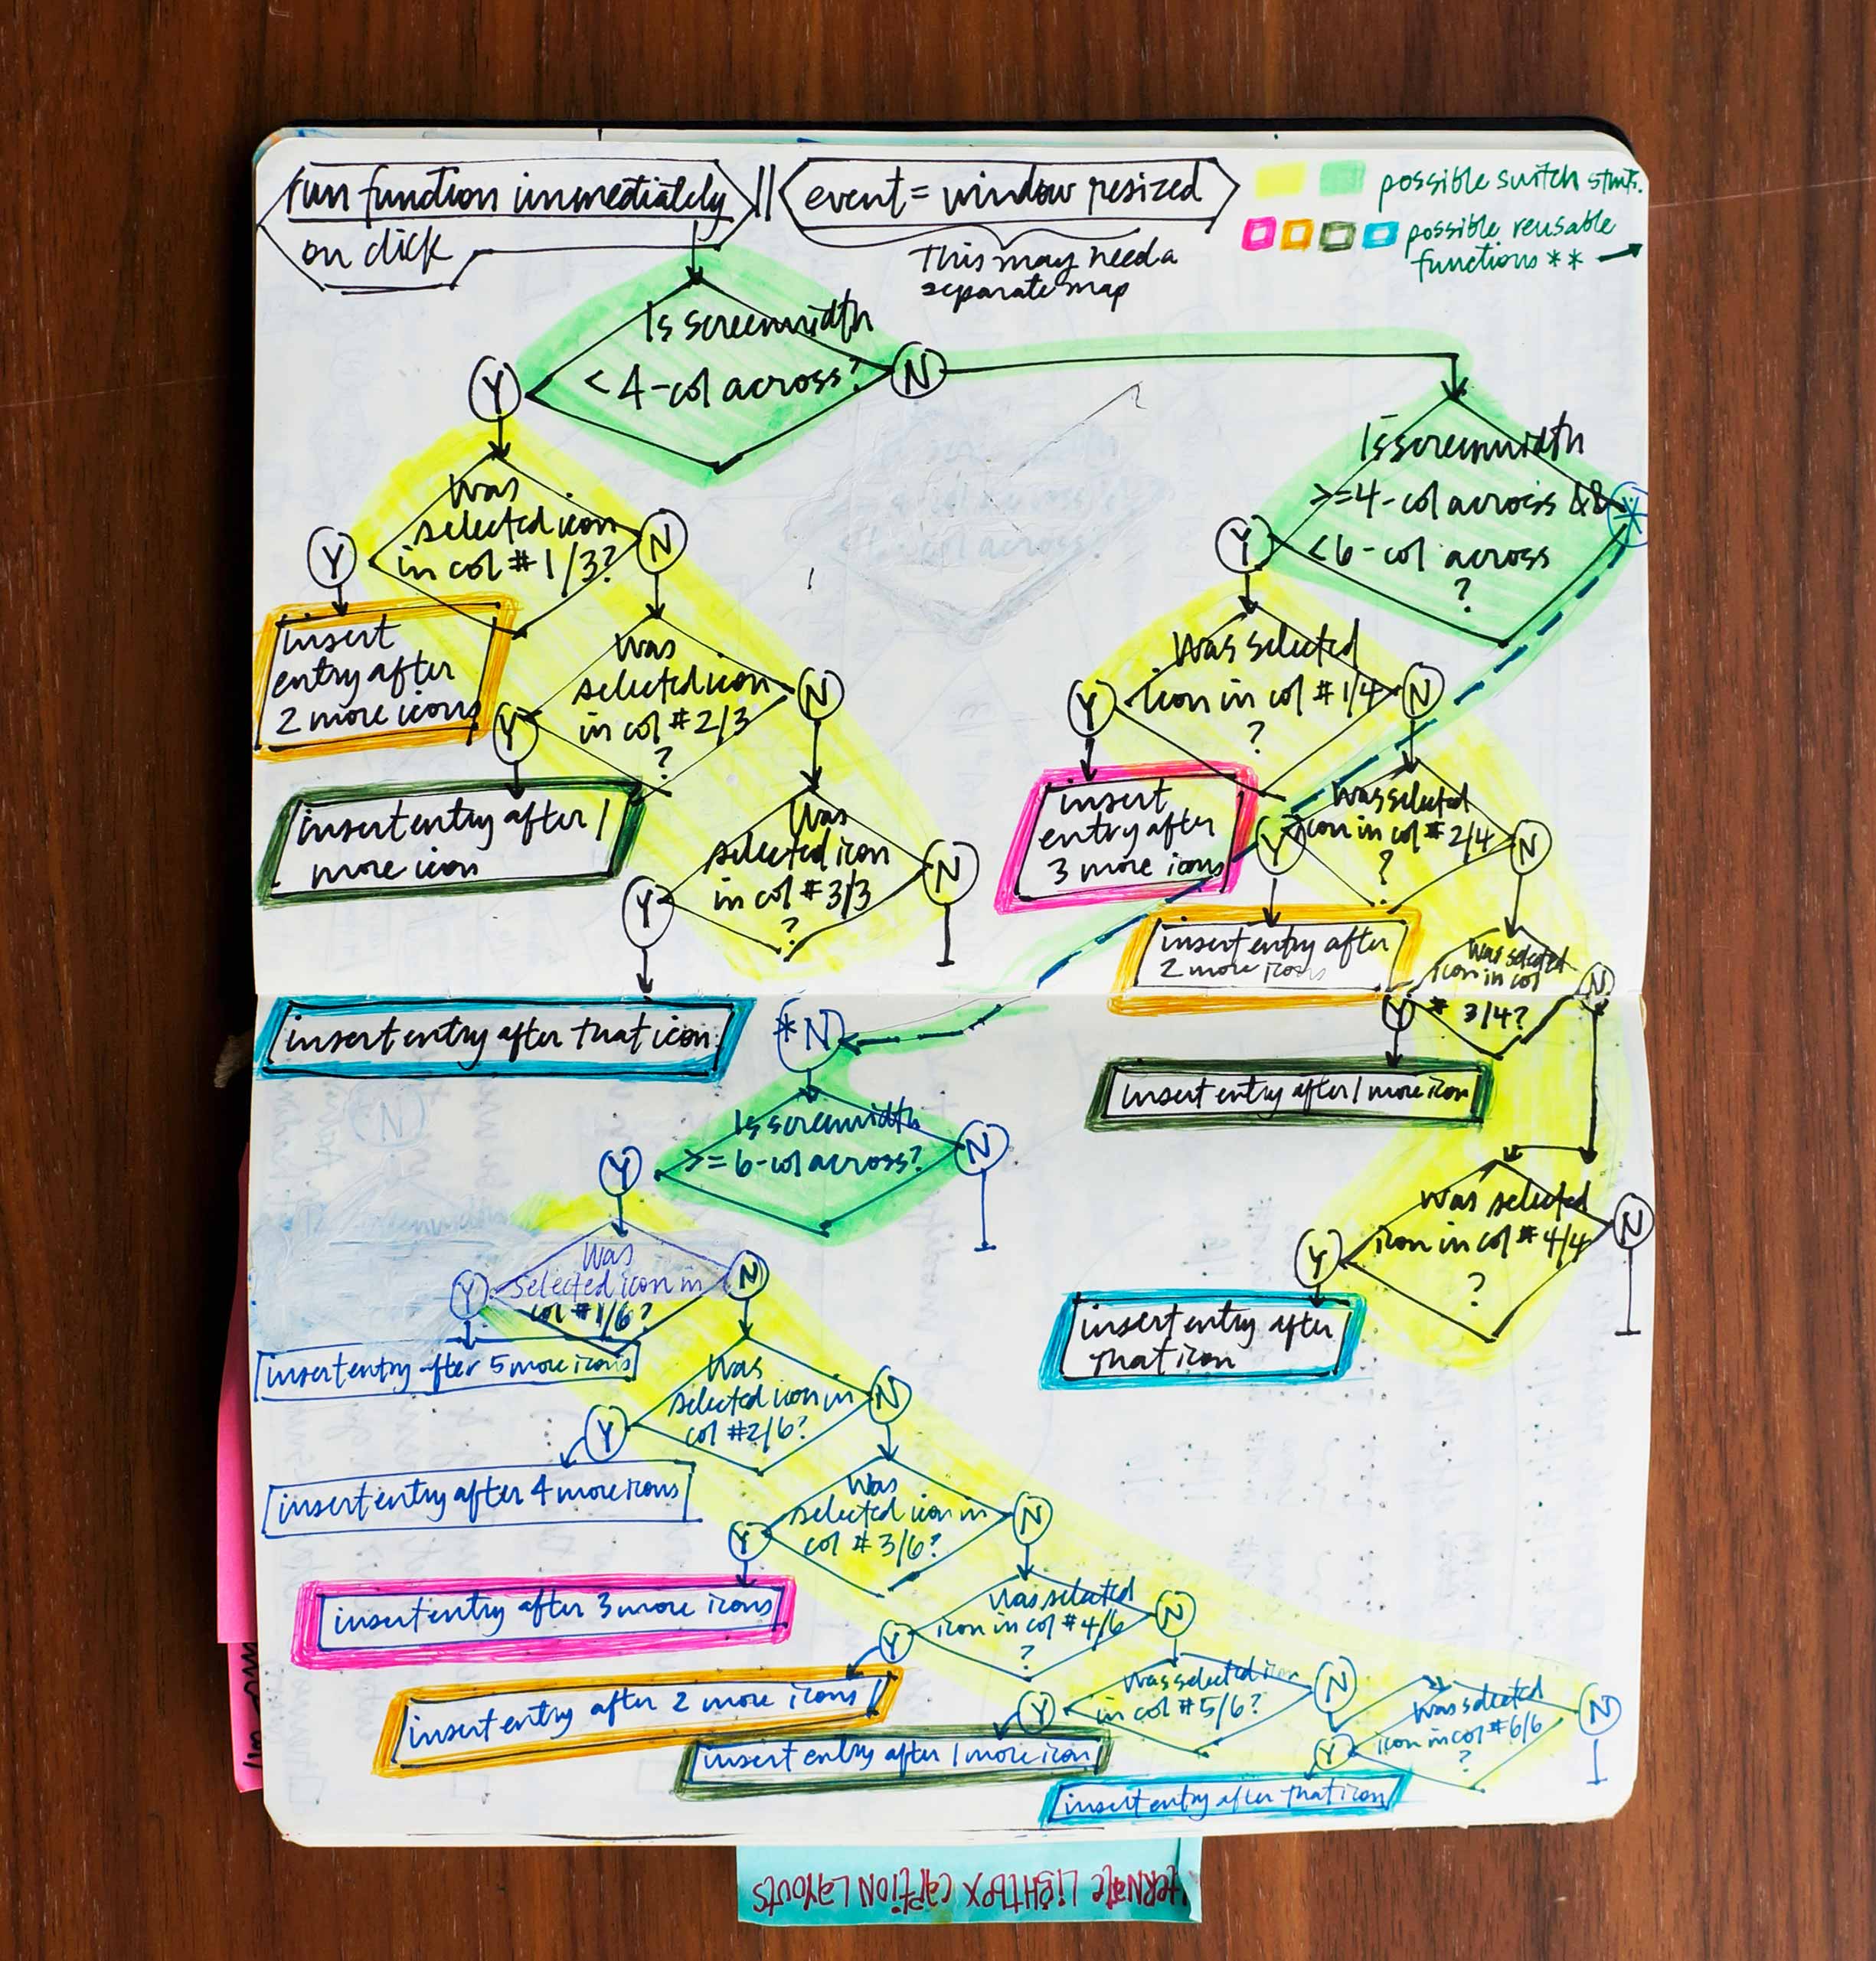 A decision tree maps out a JavaScript function, making ample use of variously colored highlighters to encode reusable methods.